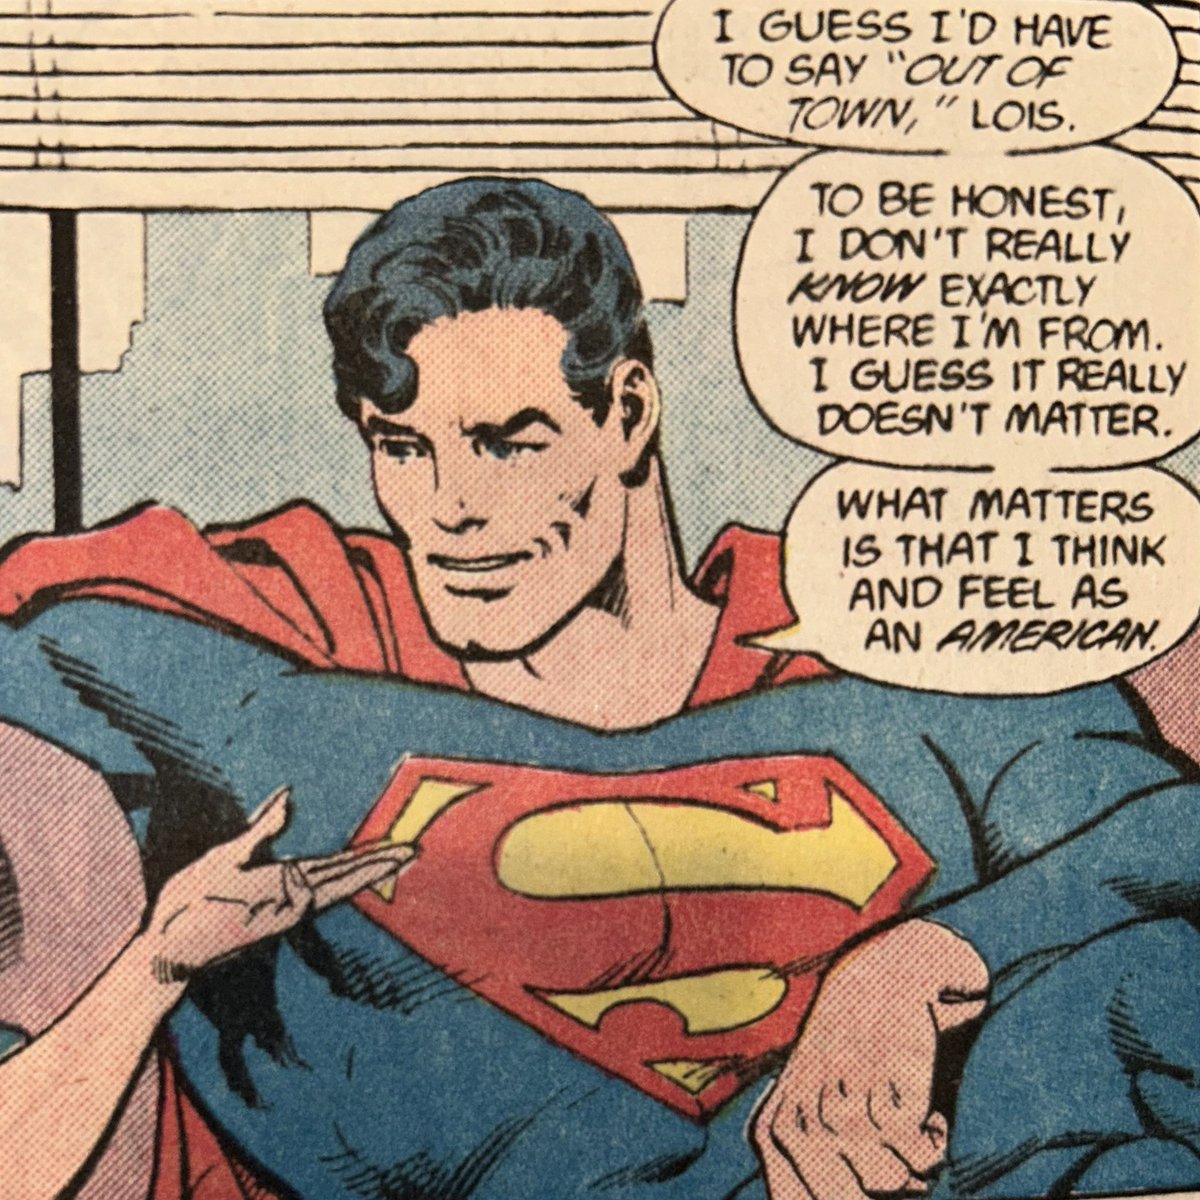 'What matters is that I think and feel as an American' might be the worst piece of Superman writing ever